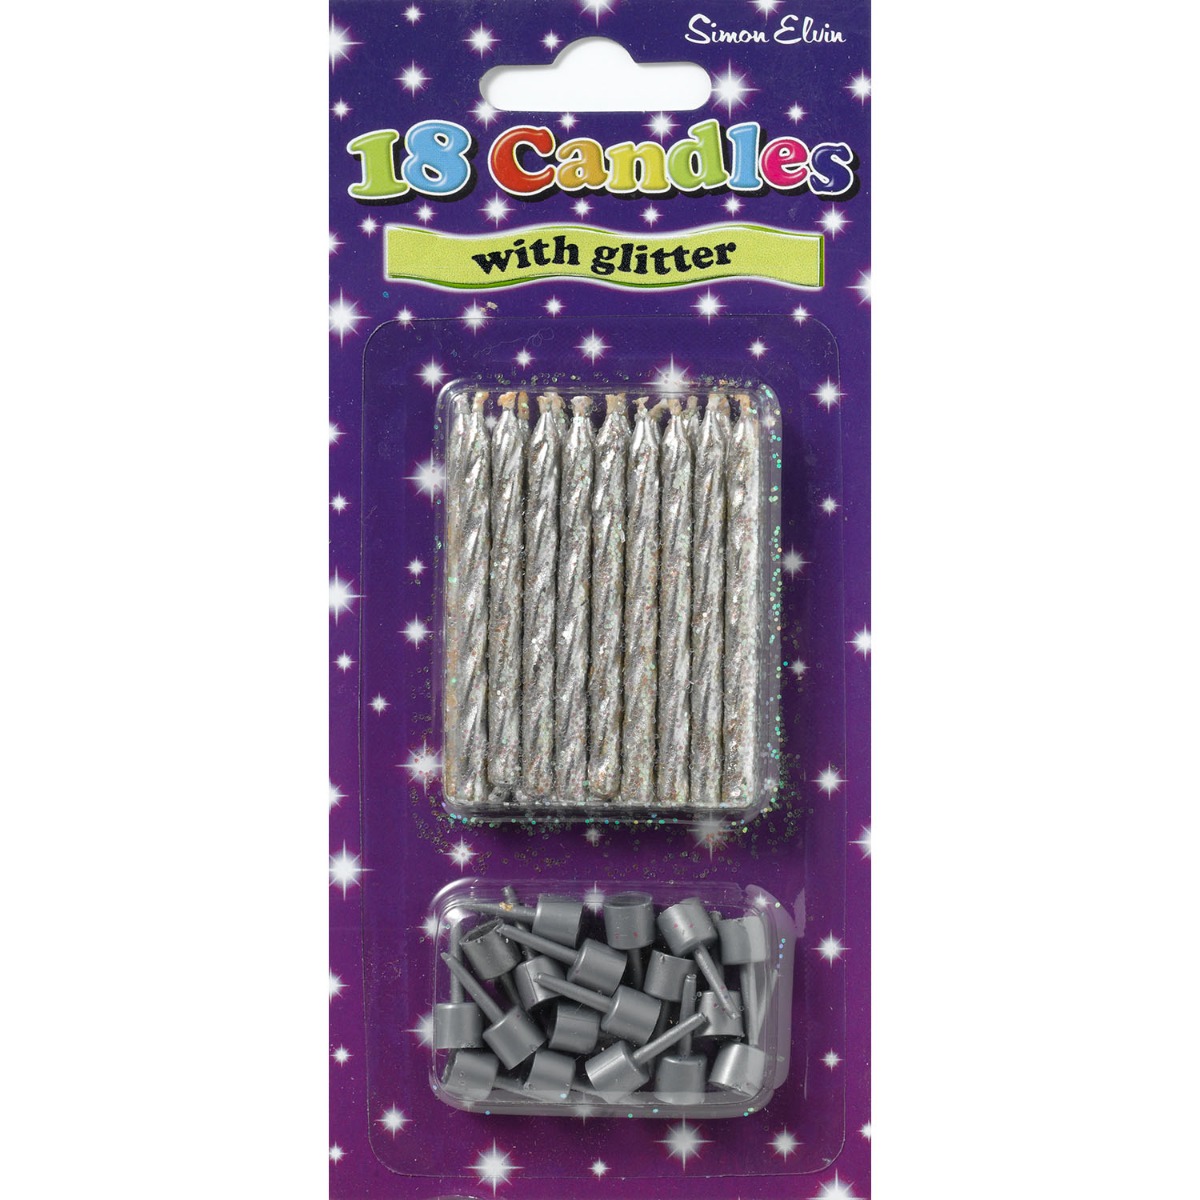 Spiral Silver Glitter Candles with Holder (18)